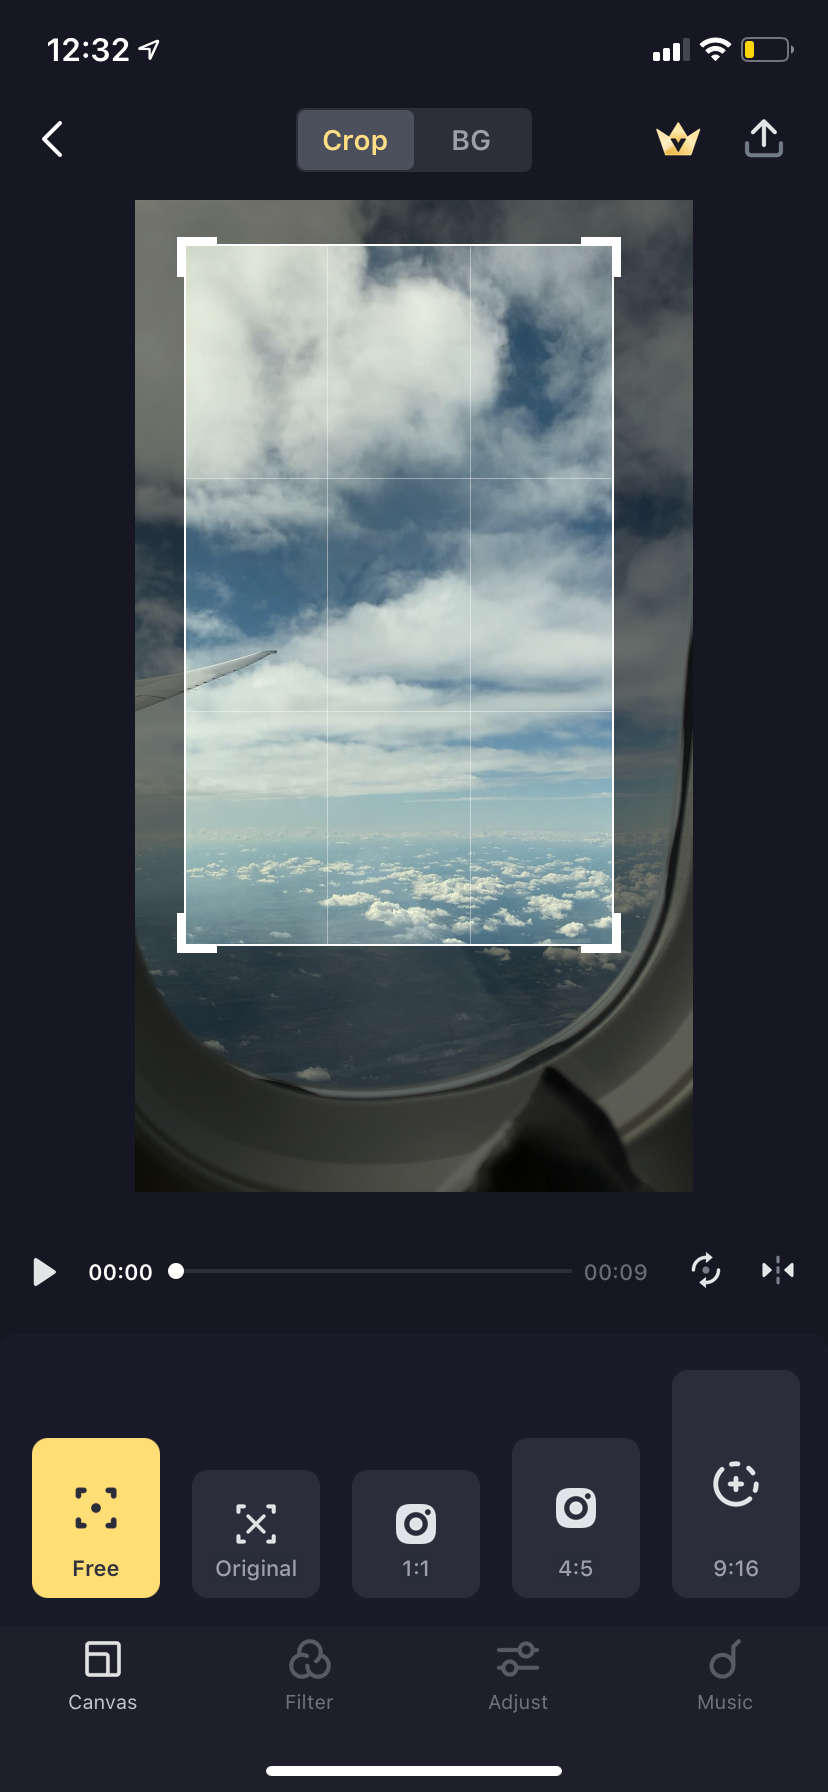 cropping a video using Crop Video app on iPhone